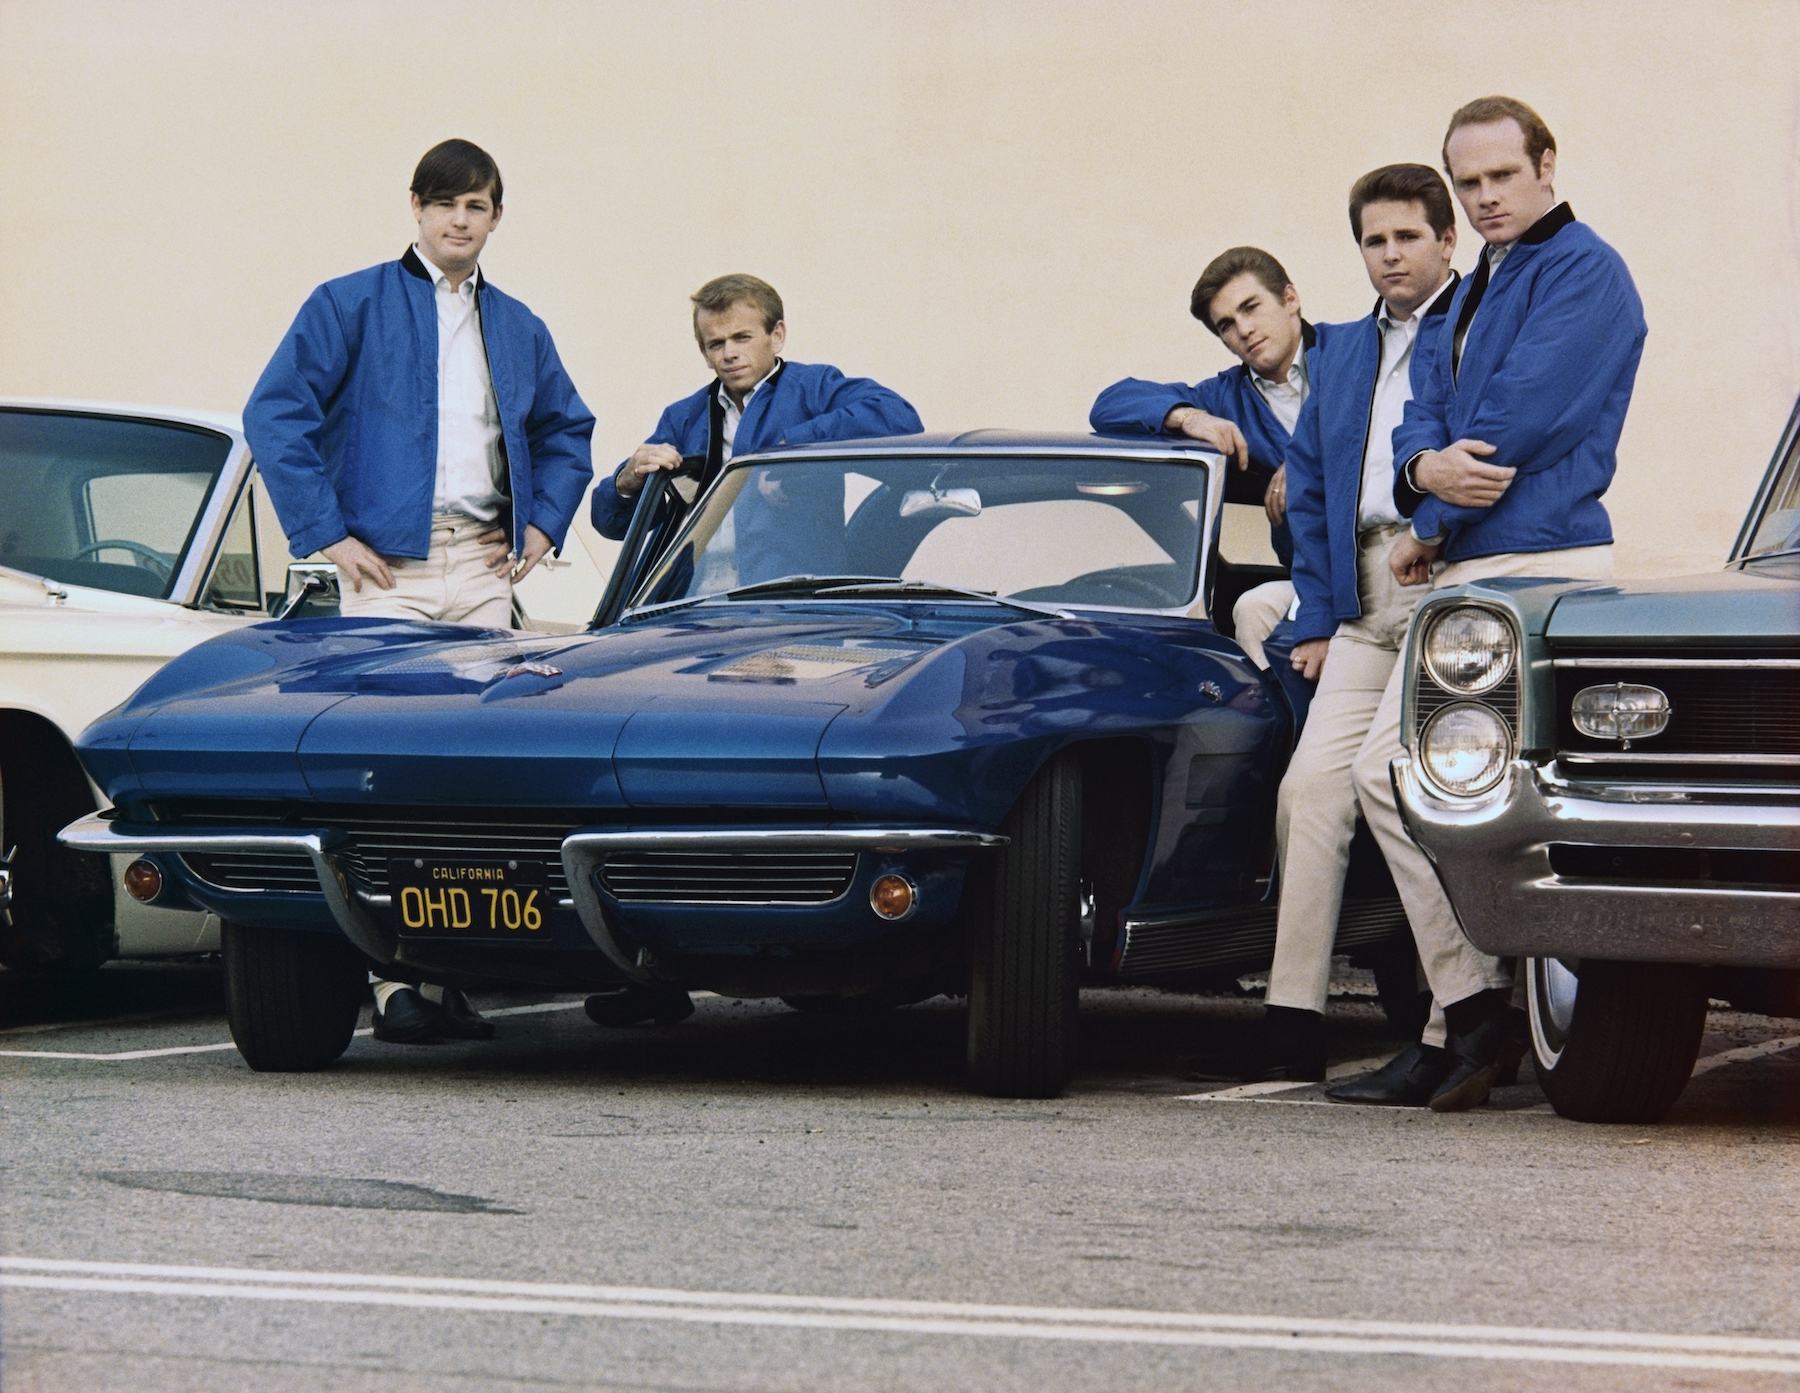 Rock and roll group The Beach Boys pose with Corvette in their photo session